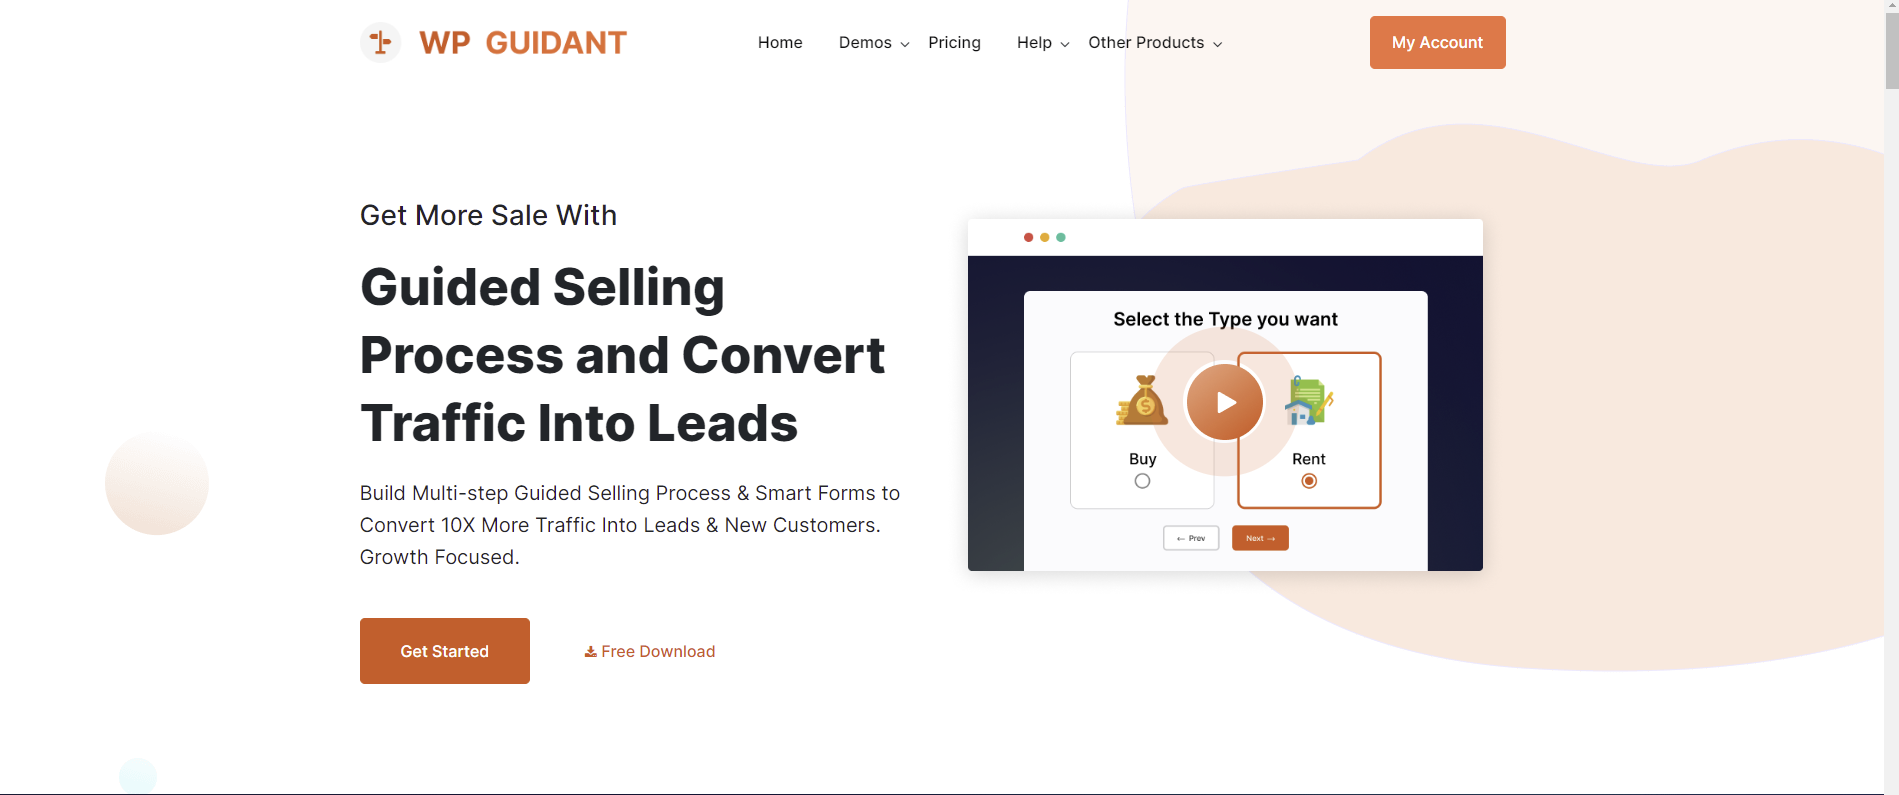 WP Guidant Landing page